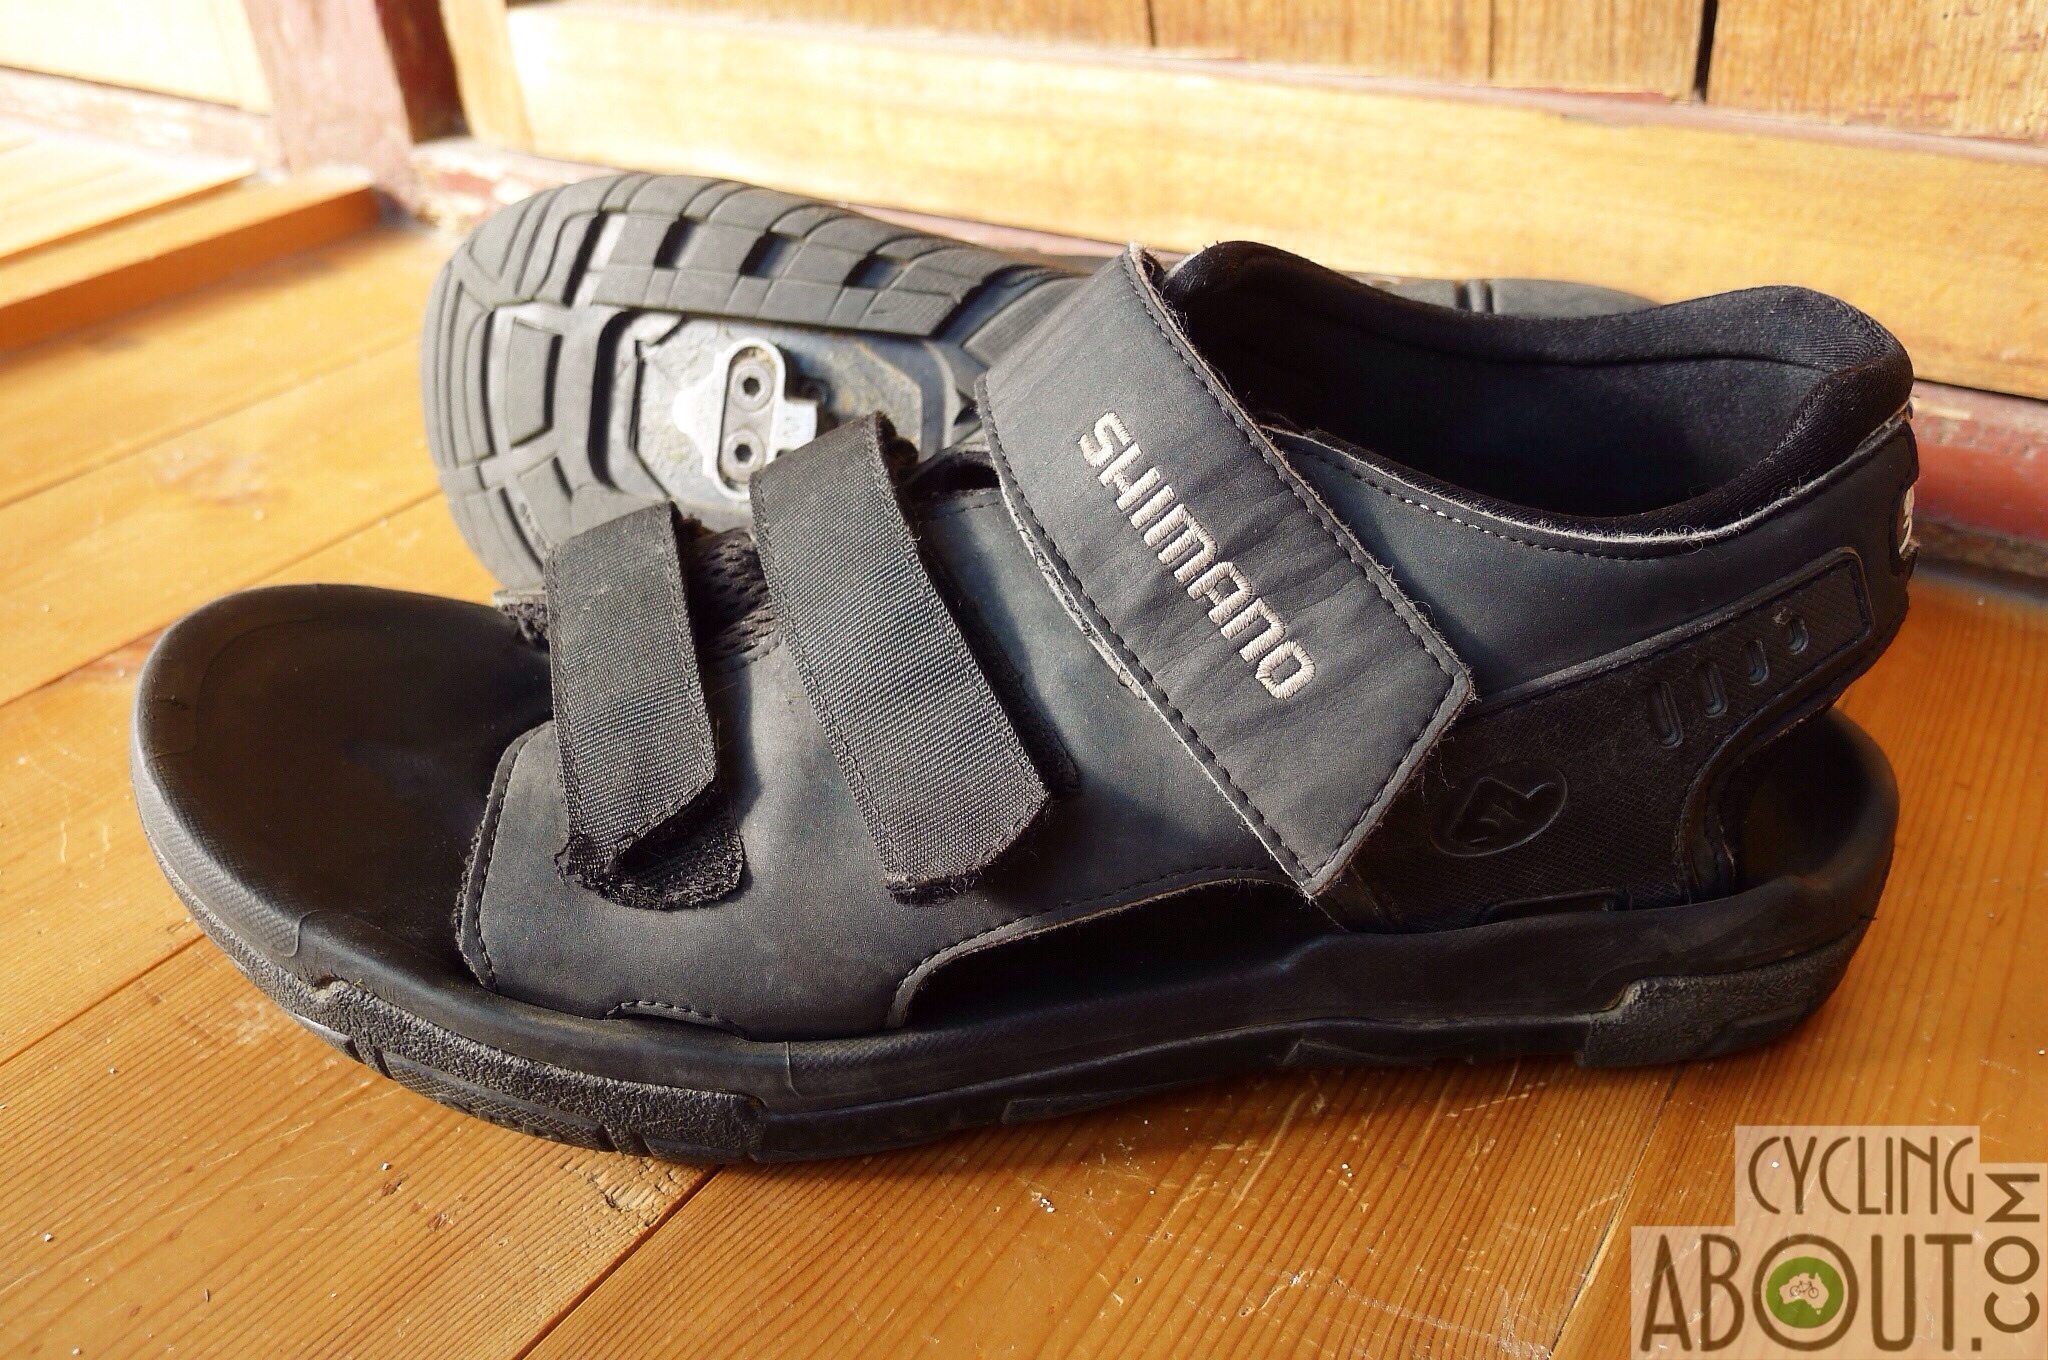 Misleading fruits Northern Cycling SPD Sandals: The Most Versatile Touring Shoes - CyclingAbout.